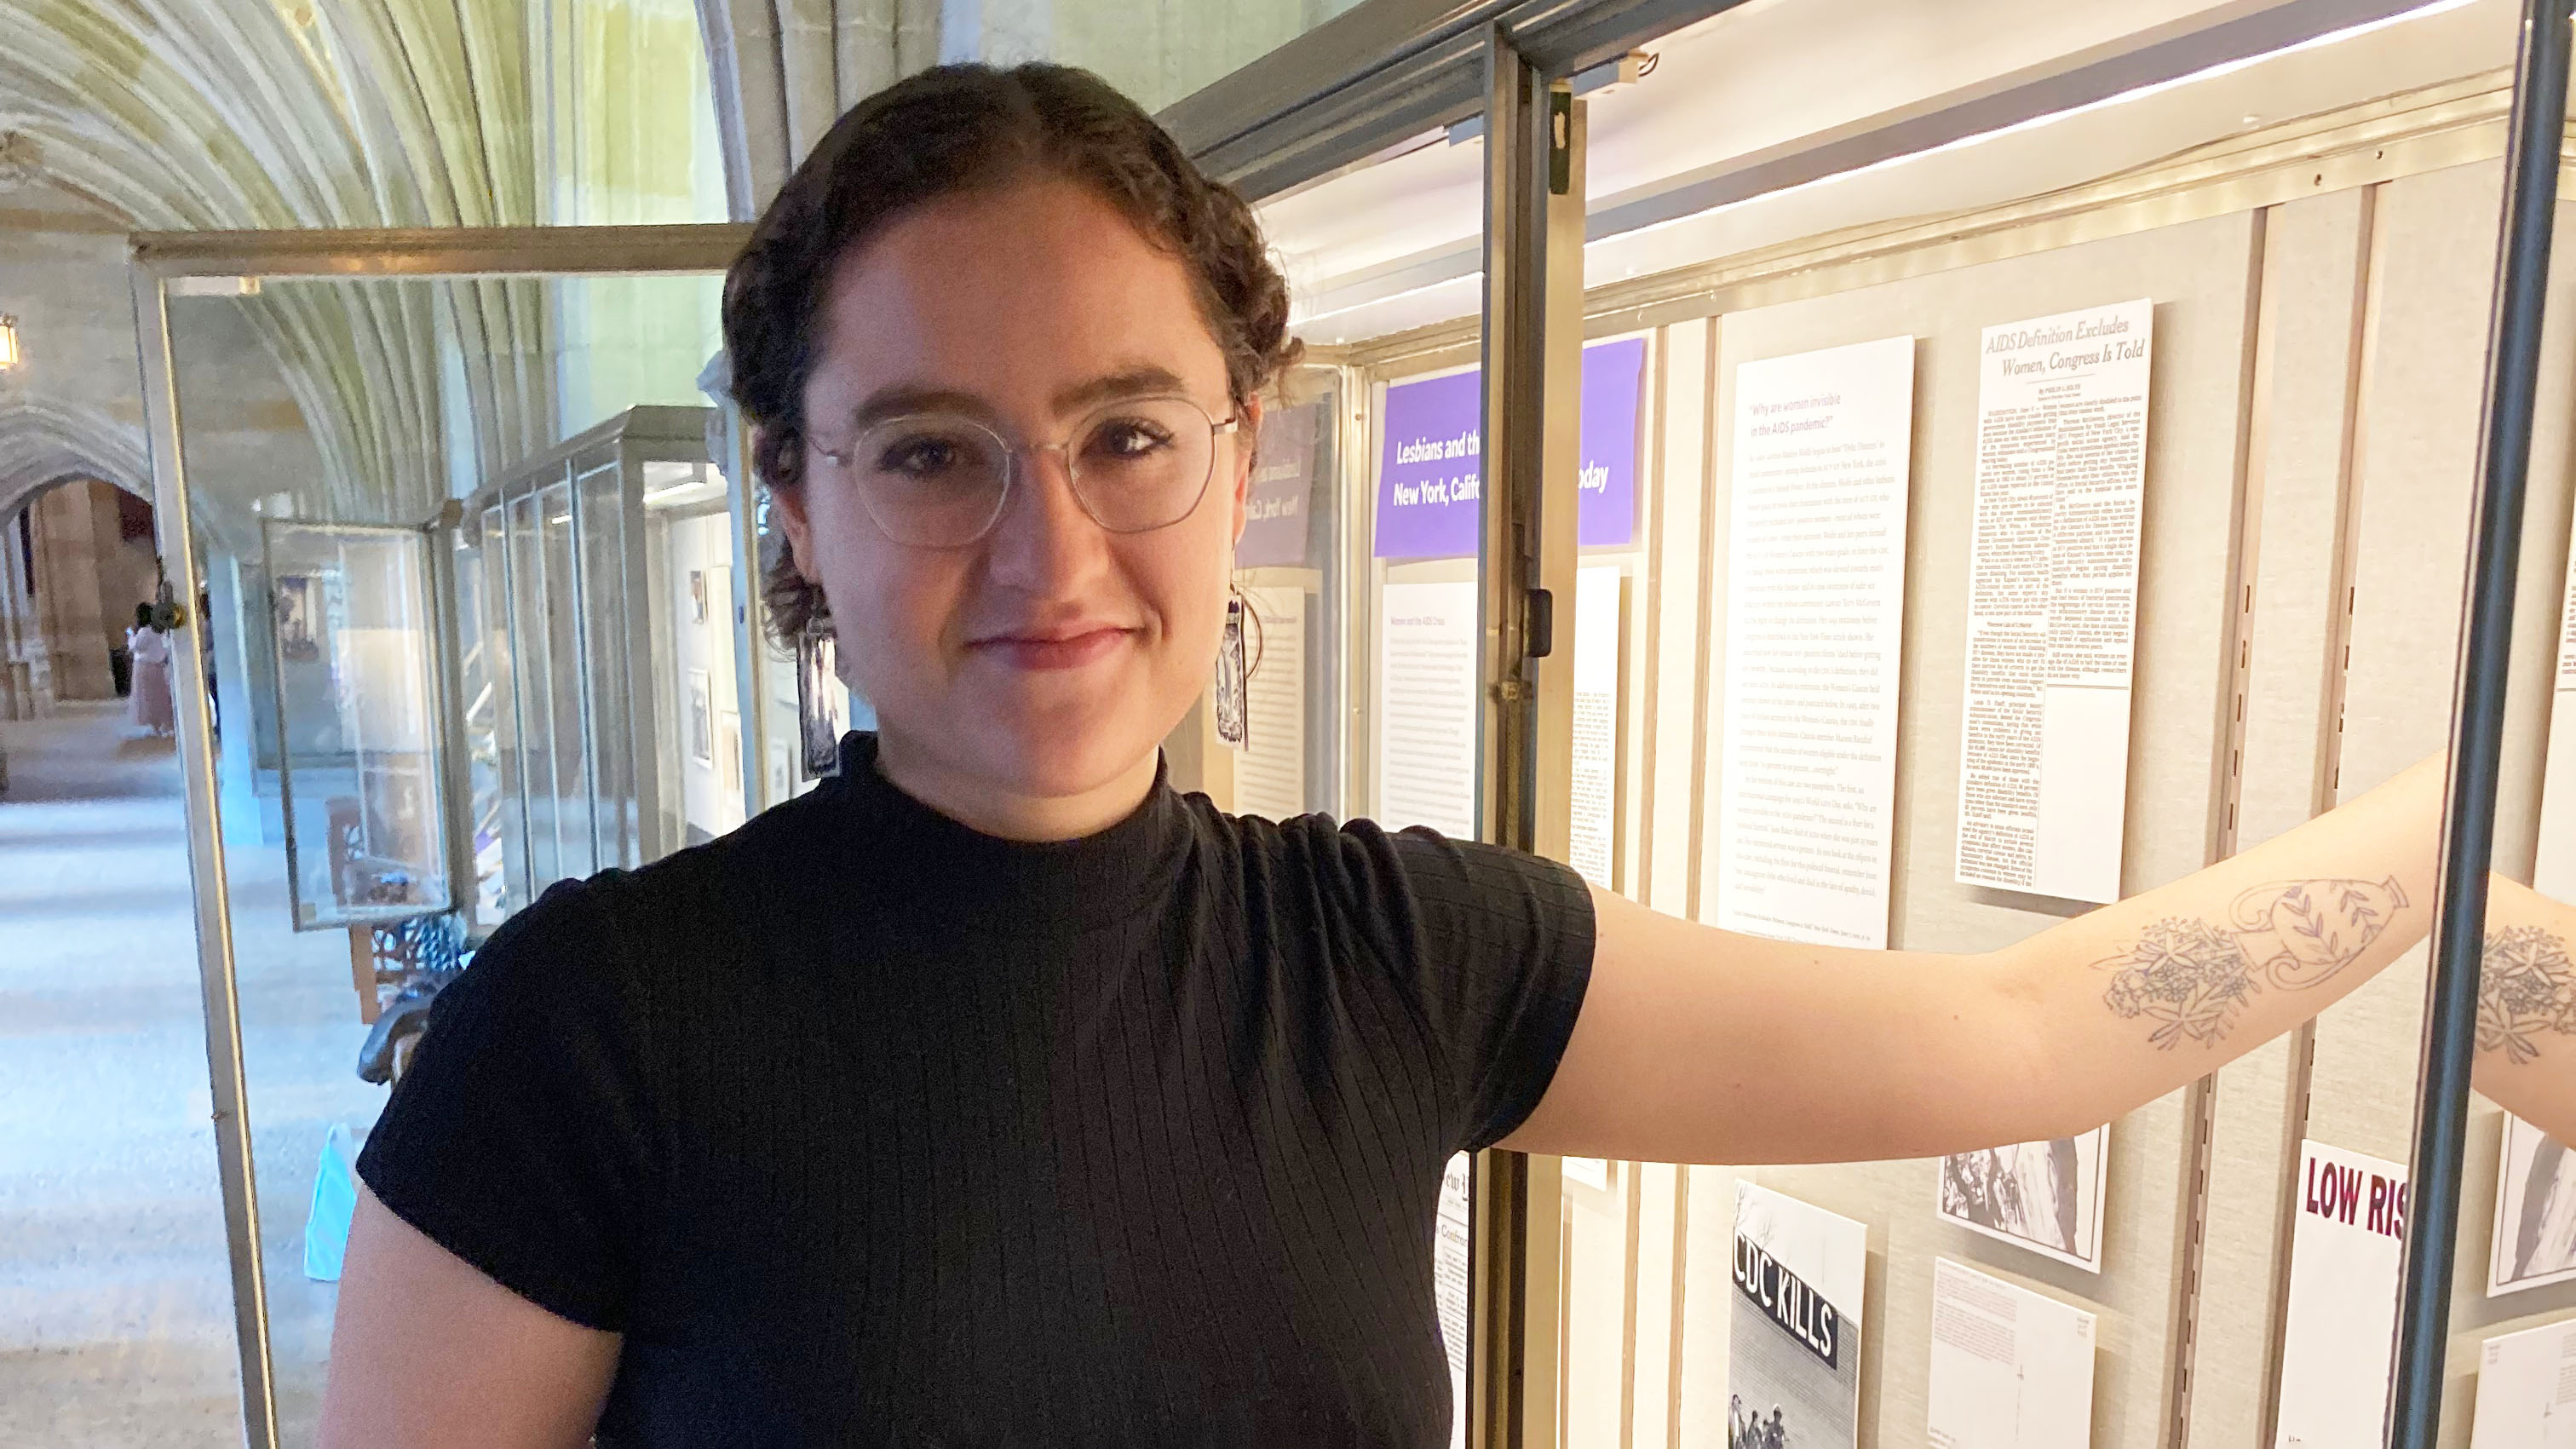 Curator Gabby Colangelo stands in front of open display case in Exhibition Corridor. She wears a short-sleeve black top, wire-rim glasses and long rectangular earrings. Her brown curly hair is tied back. She has a tattoo of a Greek vase with flowers on her forearm and reaches into the case, looking at the camera.